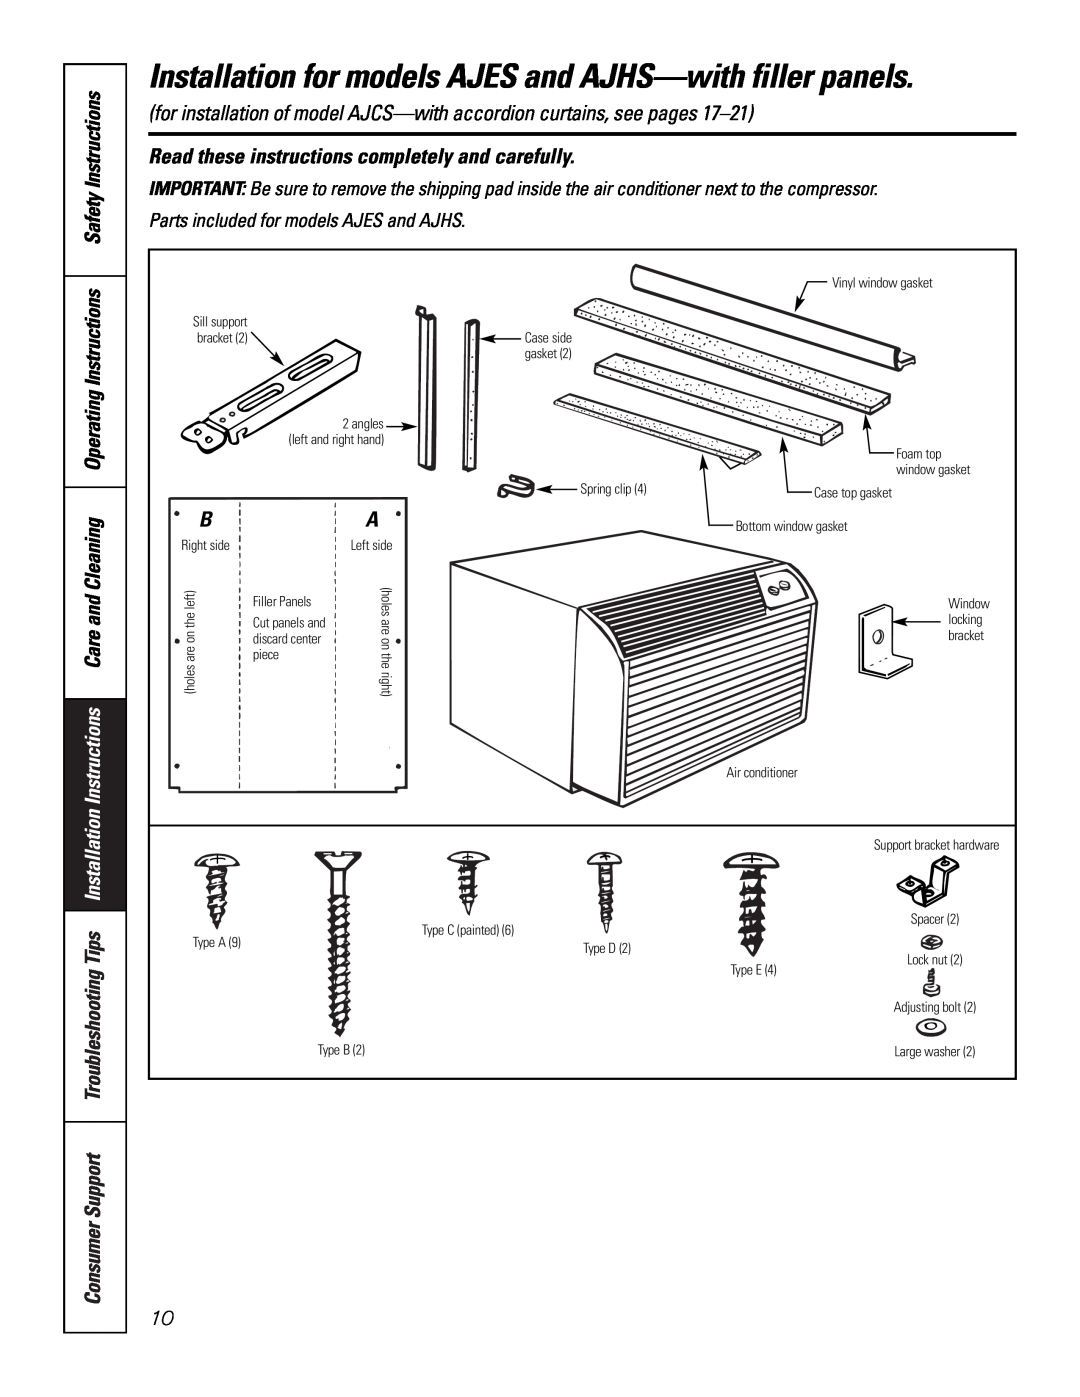 GE 10 AZA owner manual Parts included for models AJES and AJHS, Read these instructions completely and carefully 